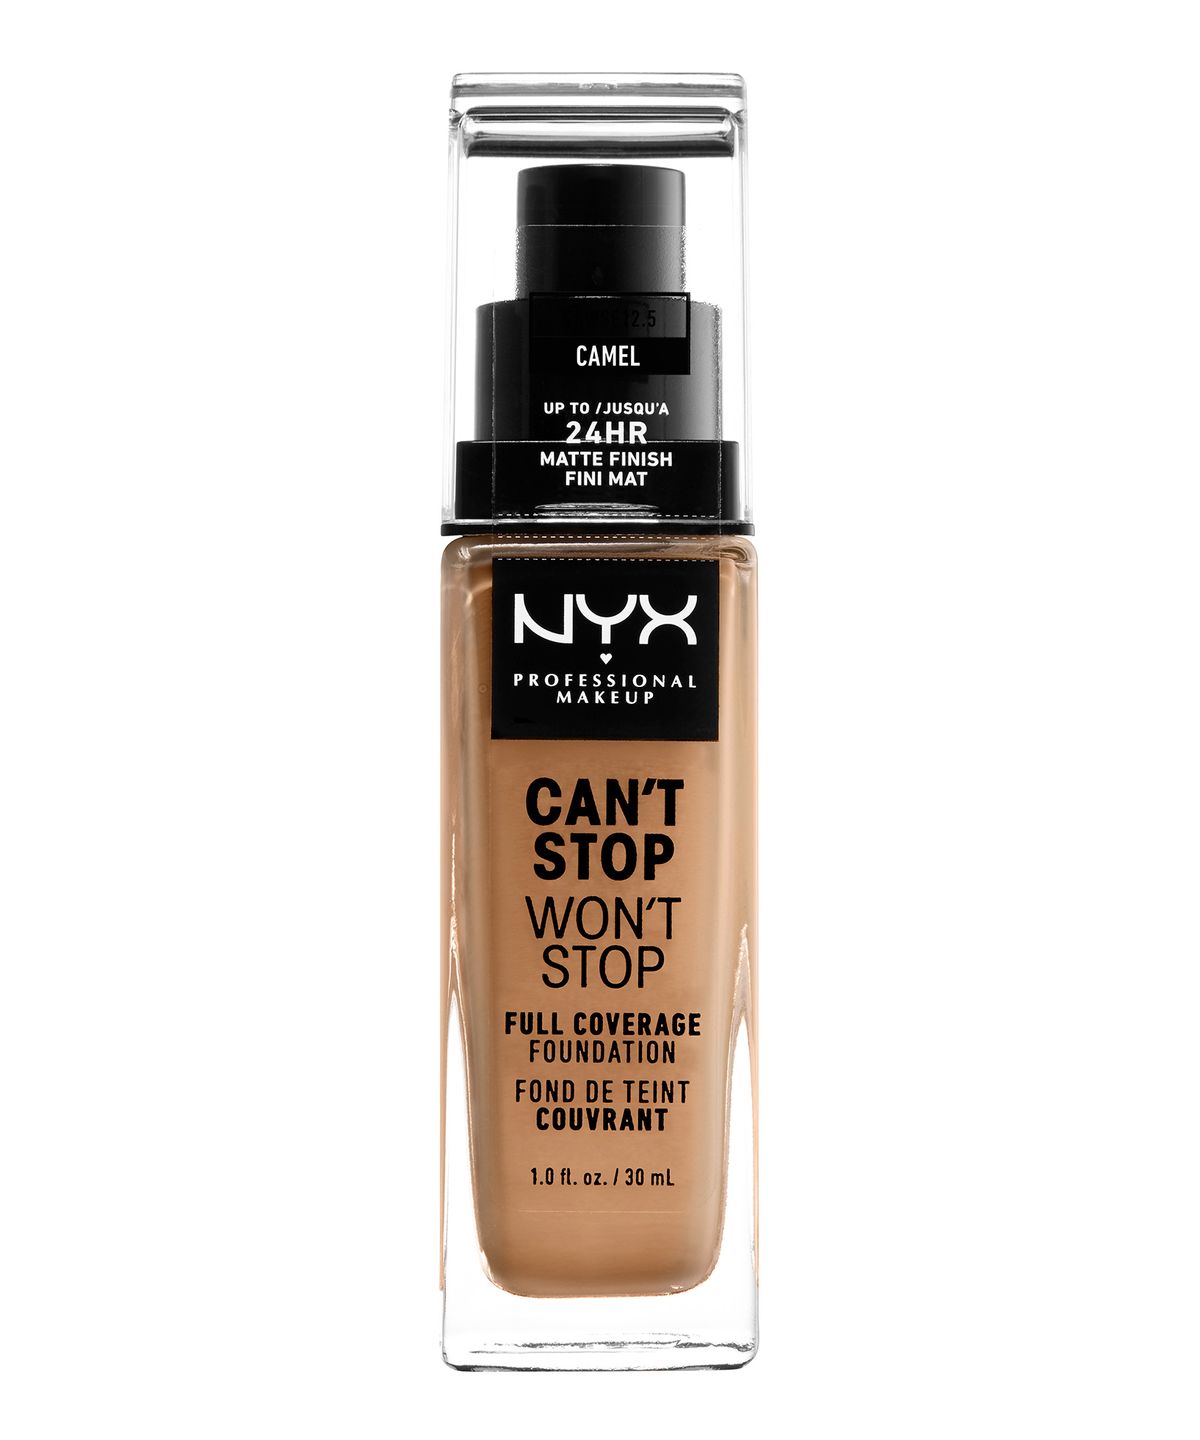 CANT STOP WONT STOP 24HR FOUNDATION CAMEL - NYX PROFESSIONAL MAKEUP